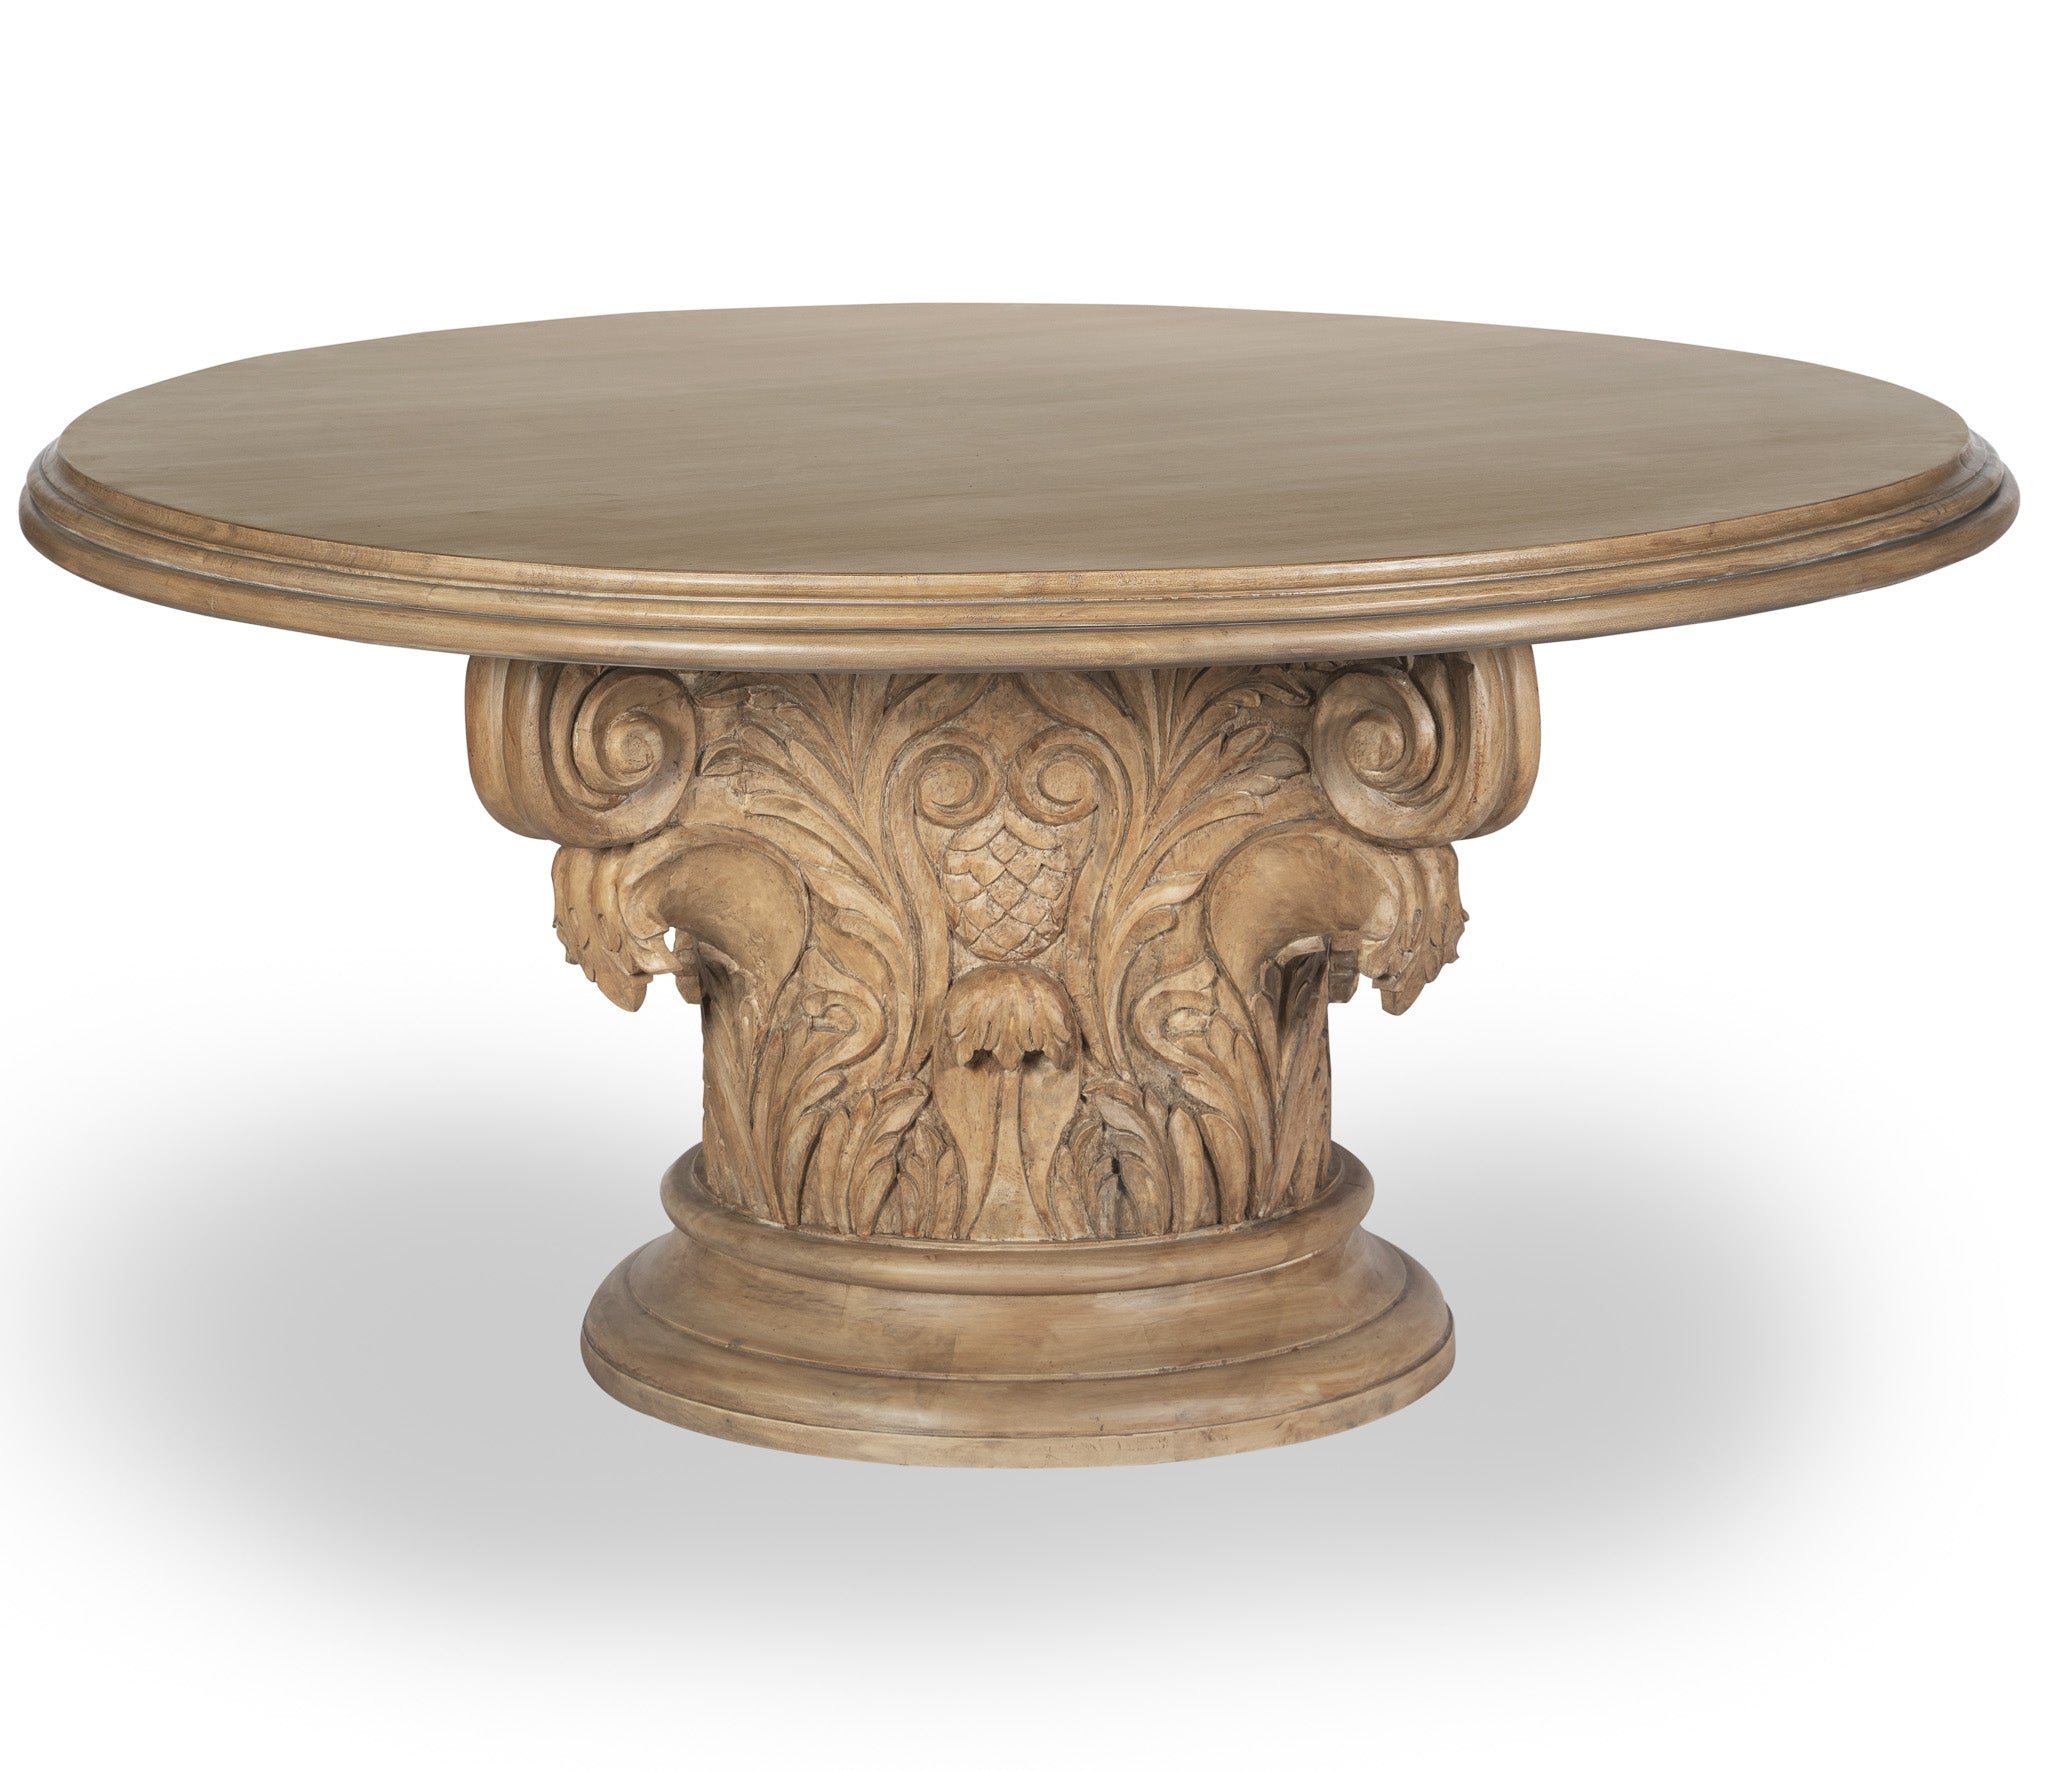 Surrey Round Dining Table